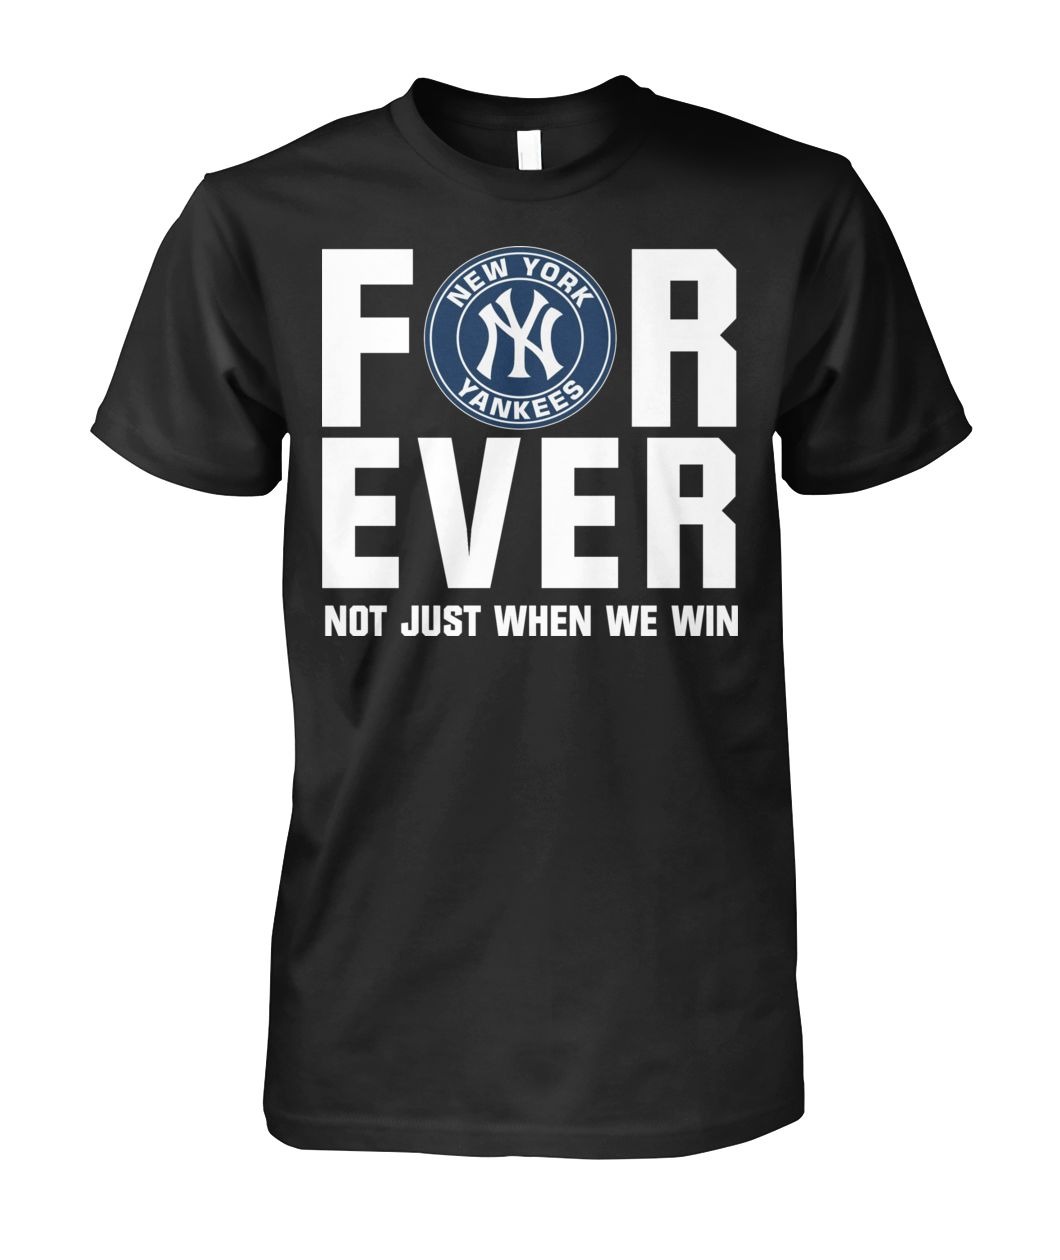 New York Yankees forever not just when we win shirt 2